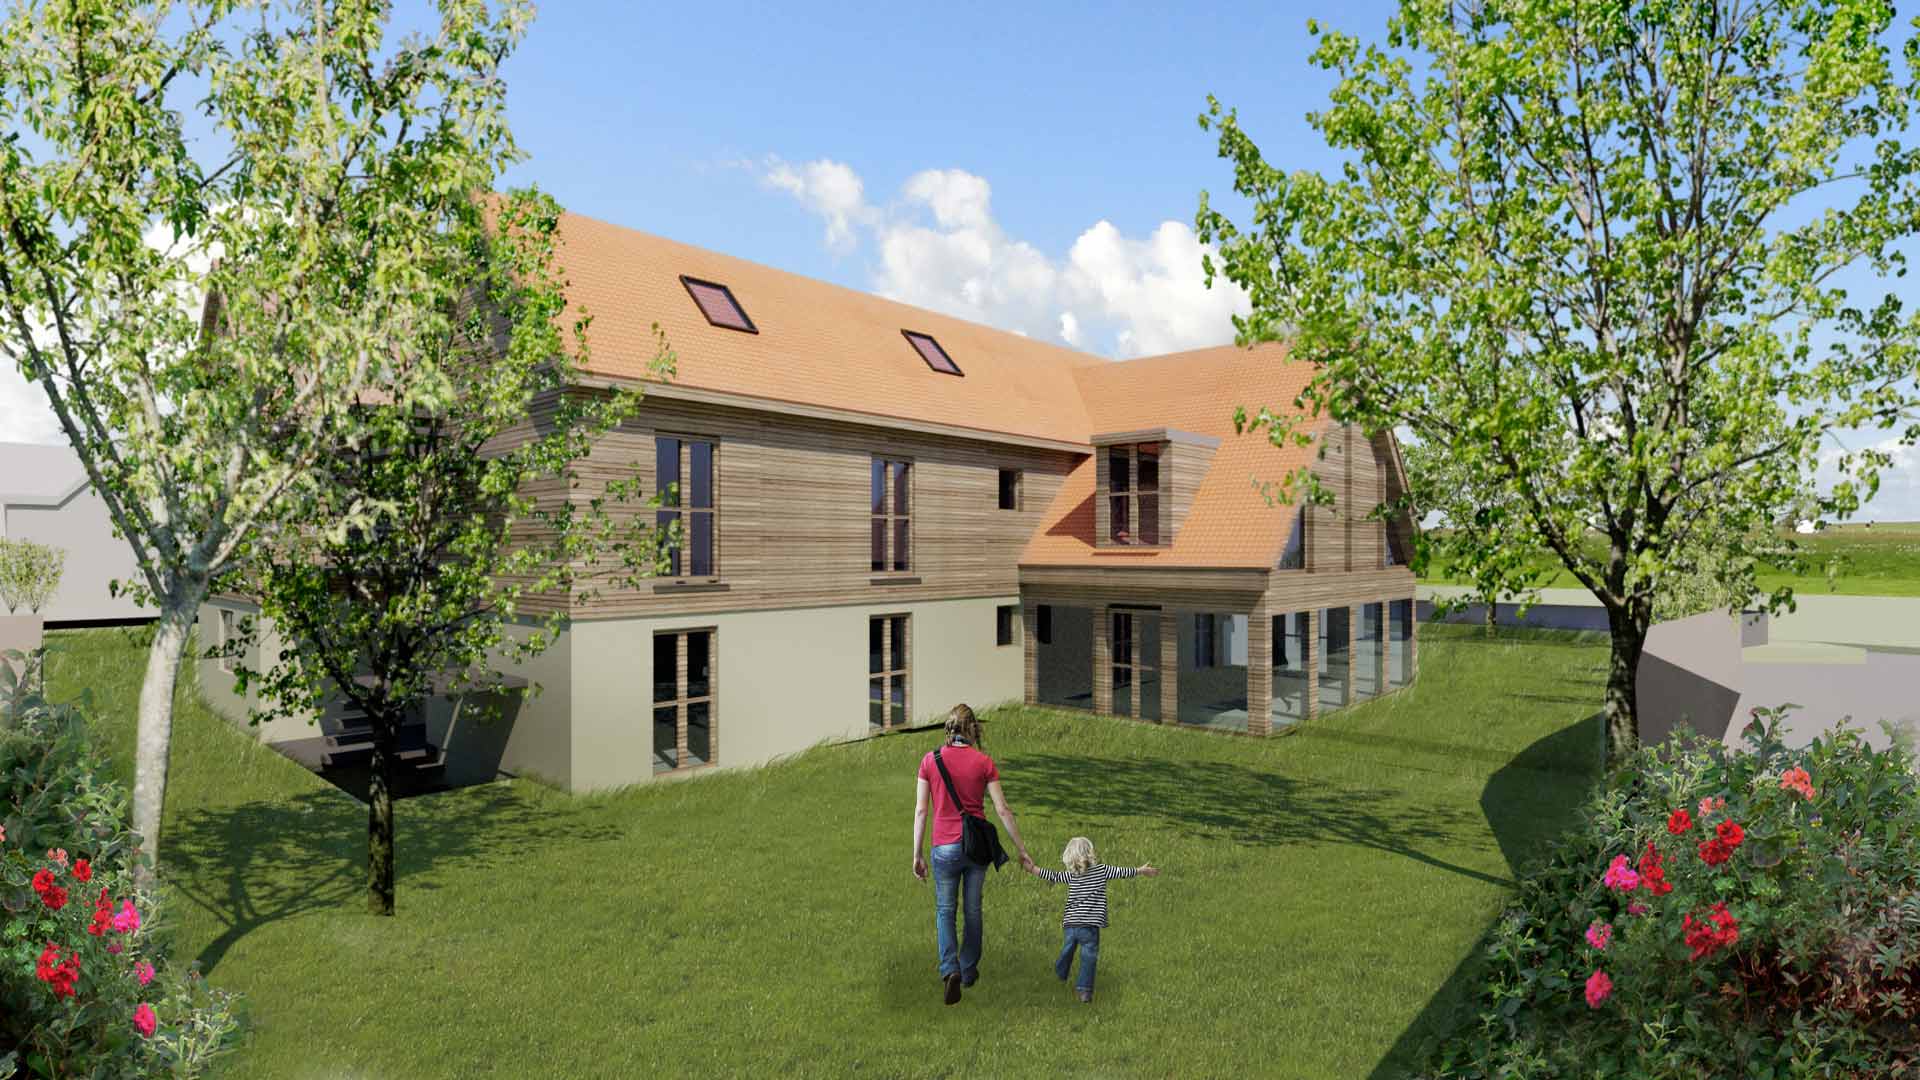 visual from rear of carehome with orange roof and wooden cladding